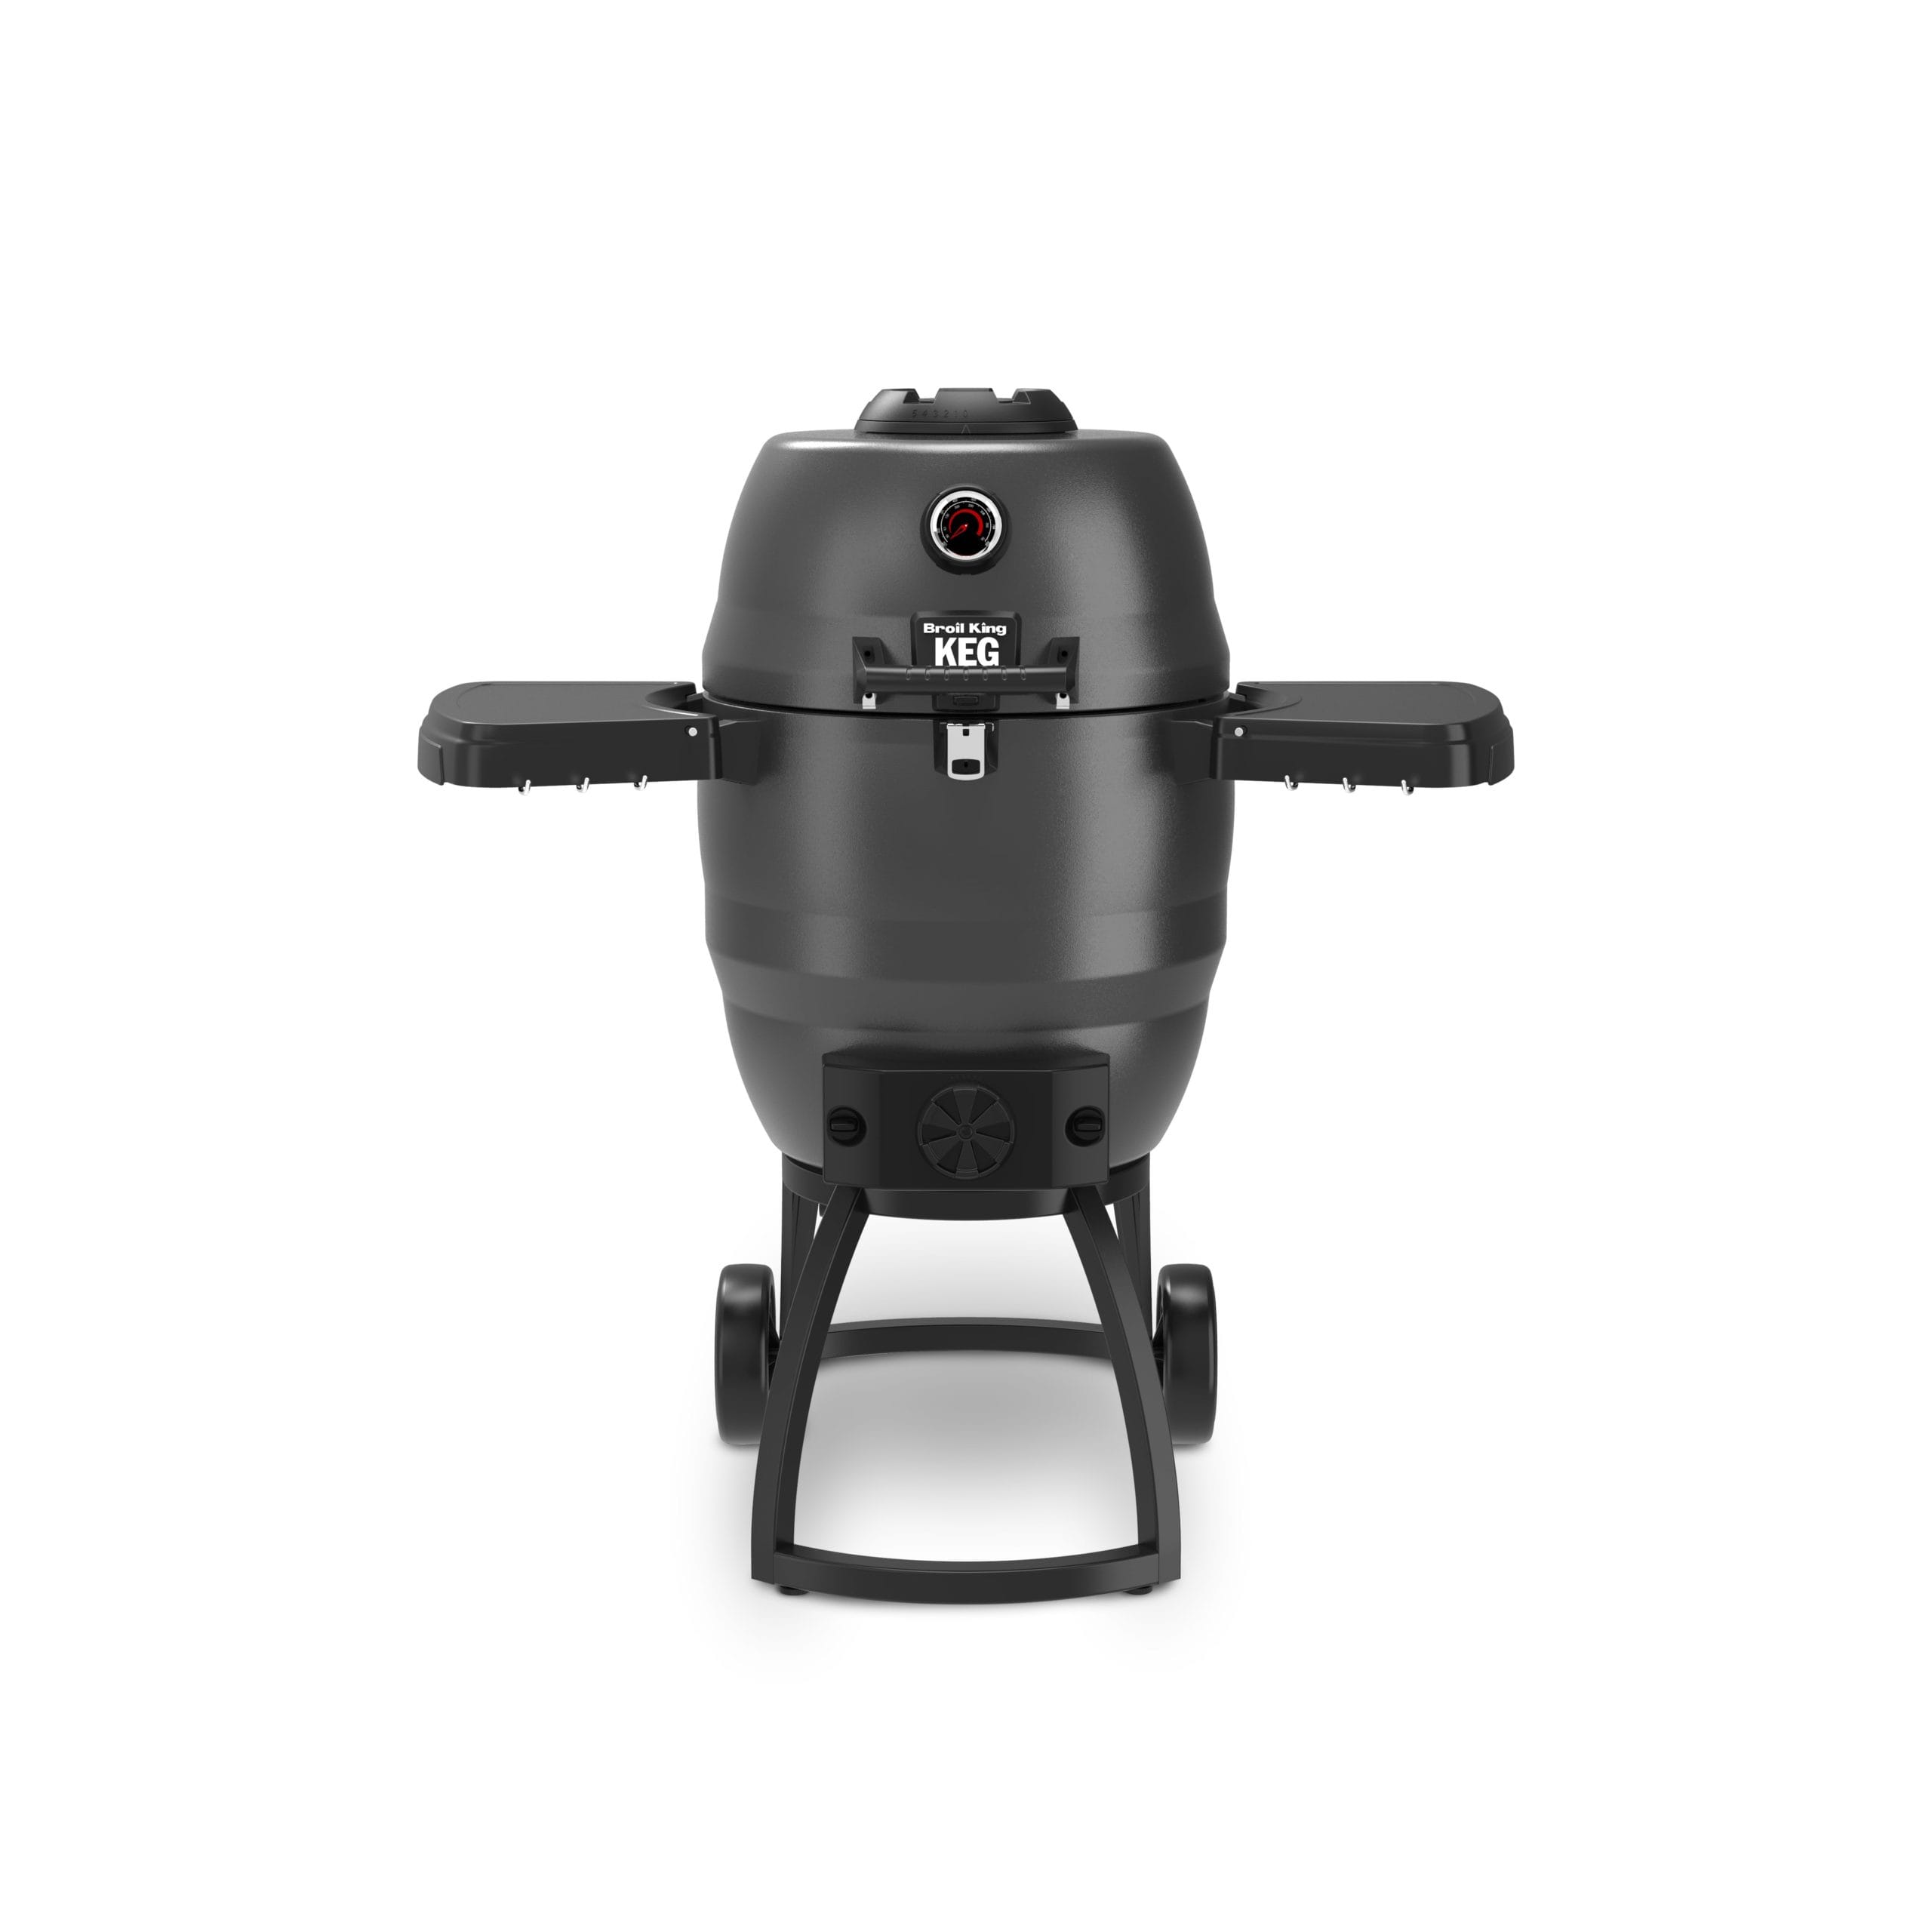 Keg5000 Charcoal Grill by Broil King